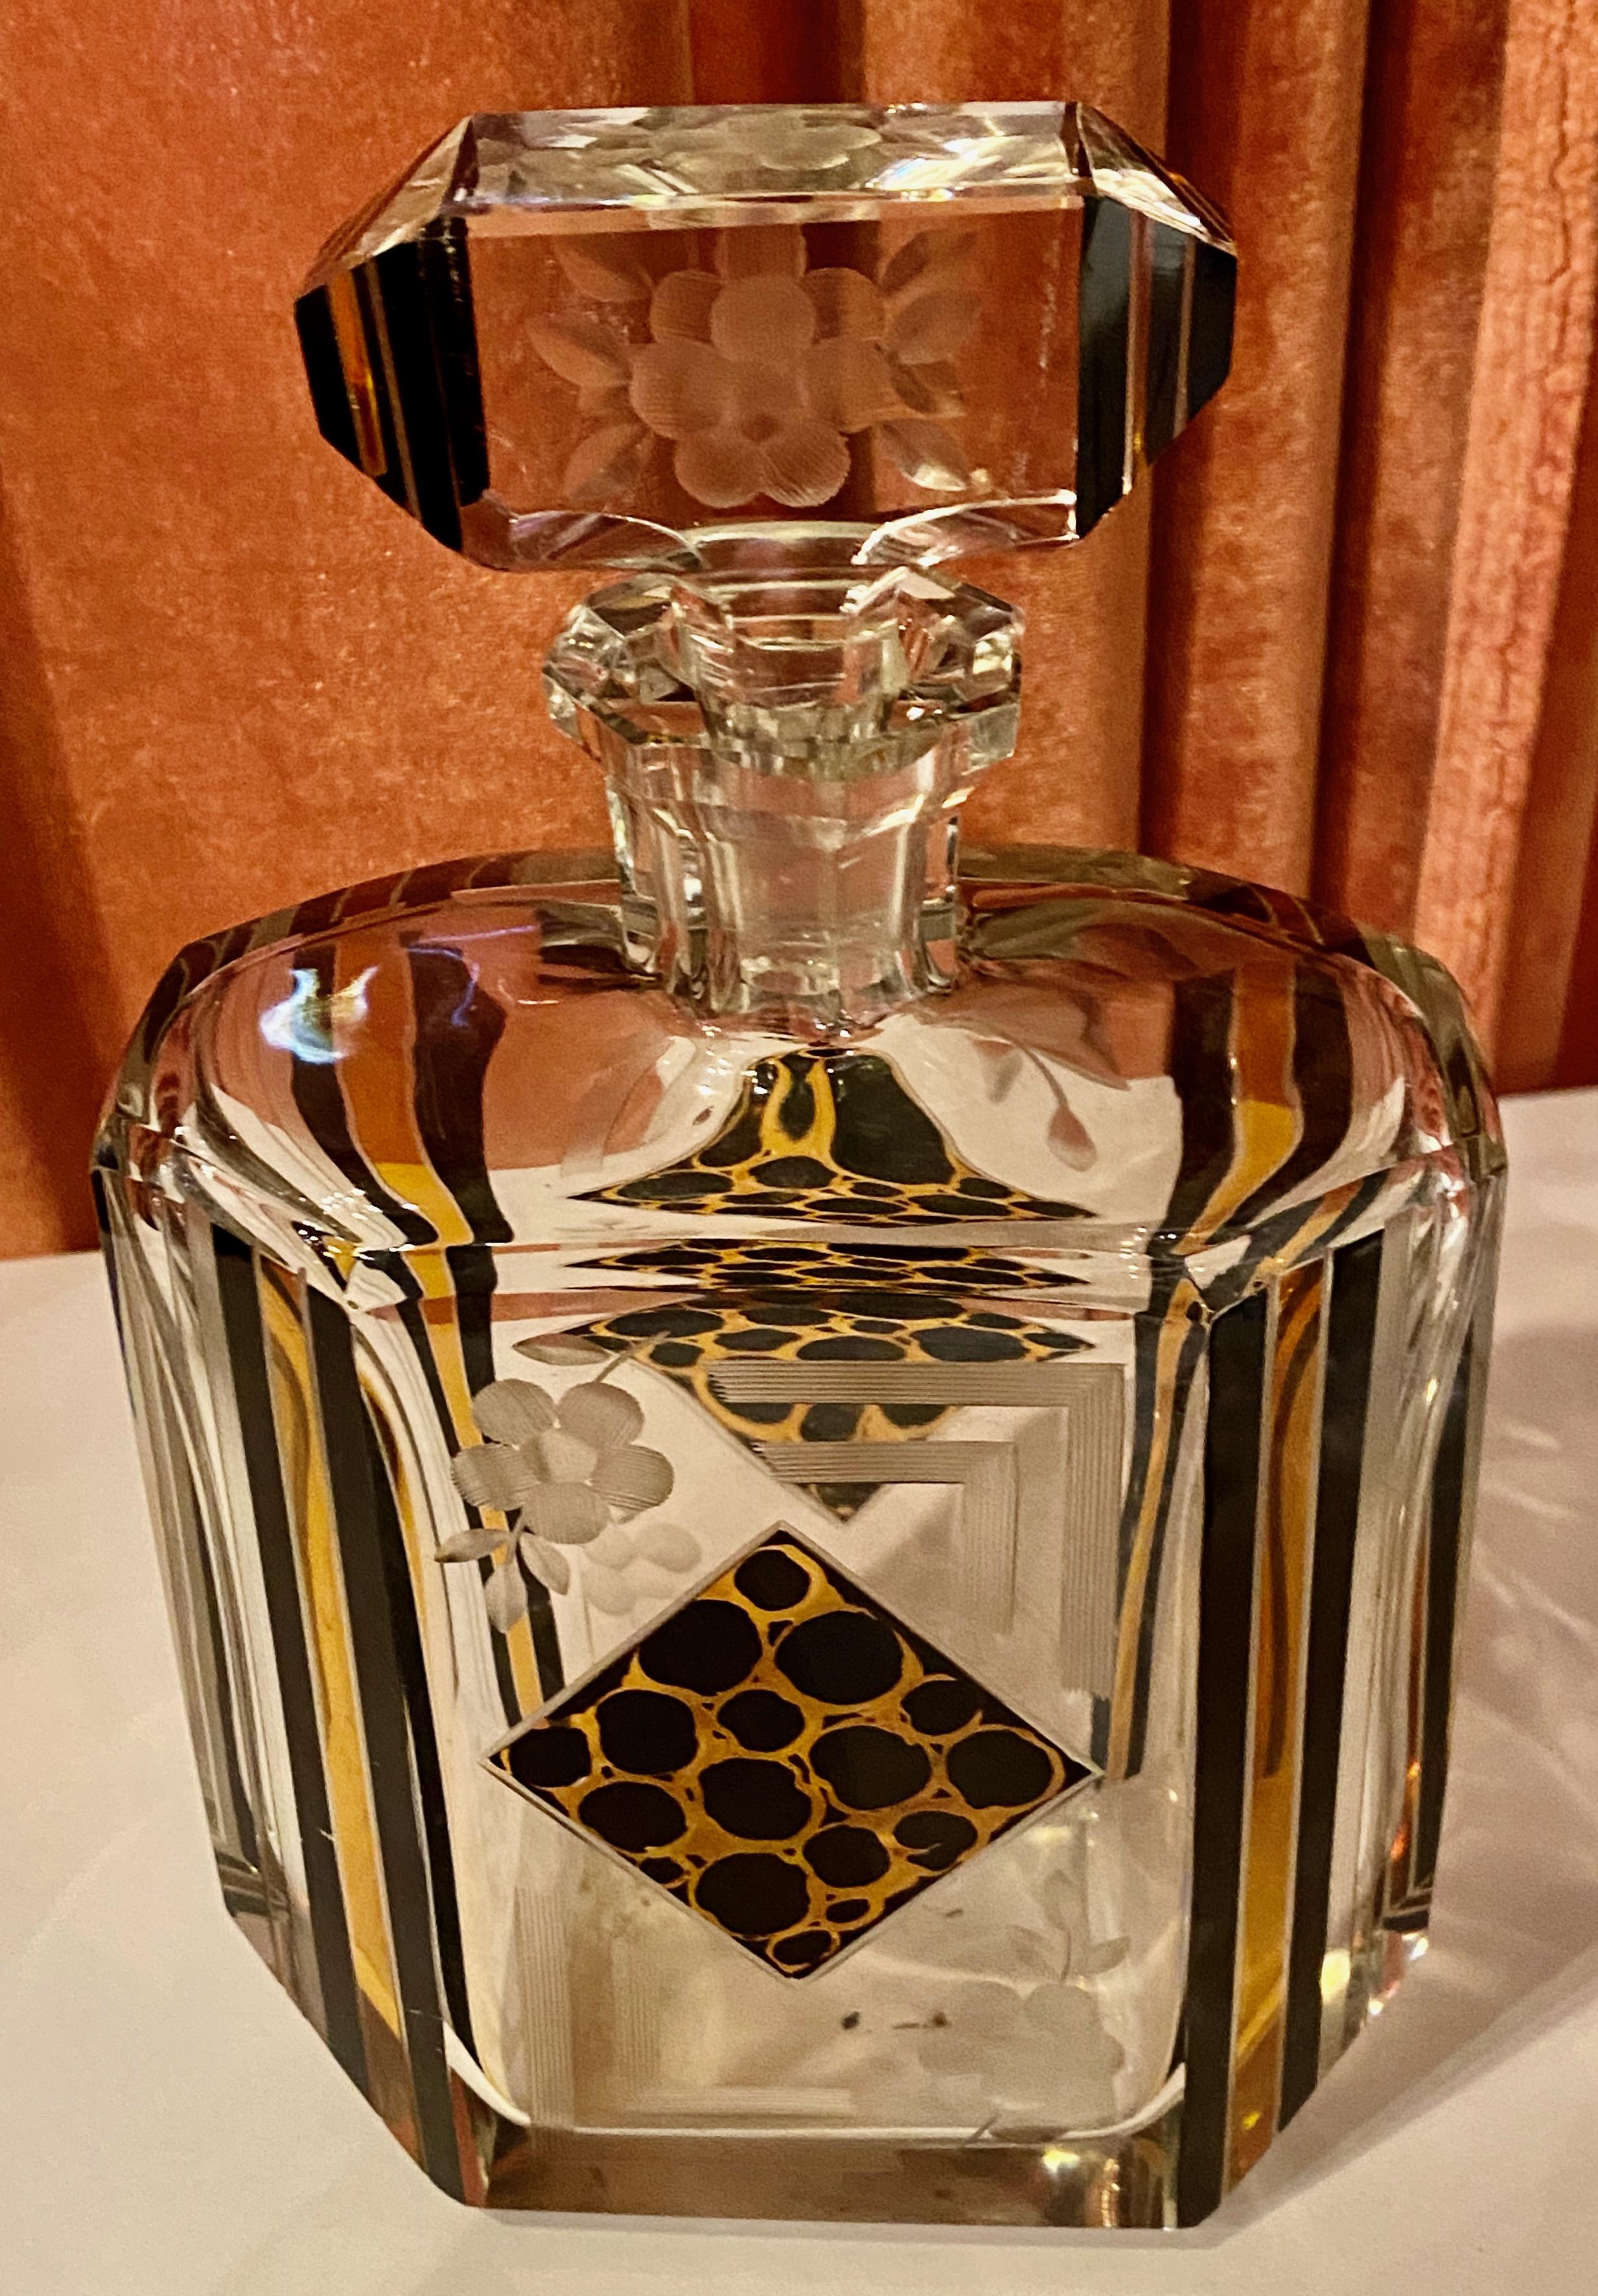 A jazzy Czechoslovakian Decanter set embellished with Avant Garde leopard black and gold in a decidedly symmetric diamond pattern unusual in its time with banded black and gold lines. There are also engraved florals on all pieces. This handsome set